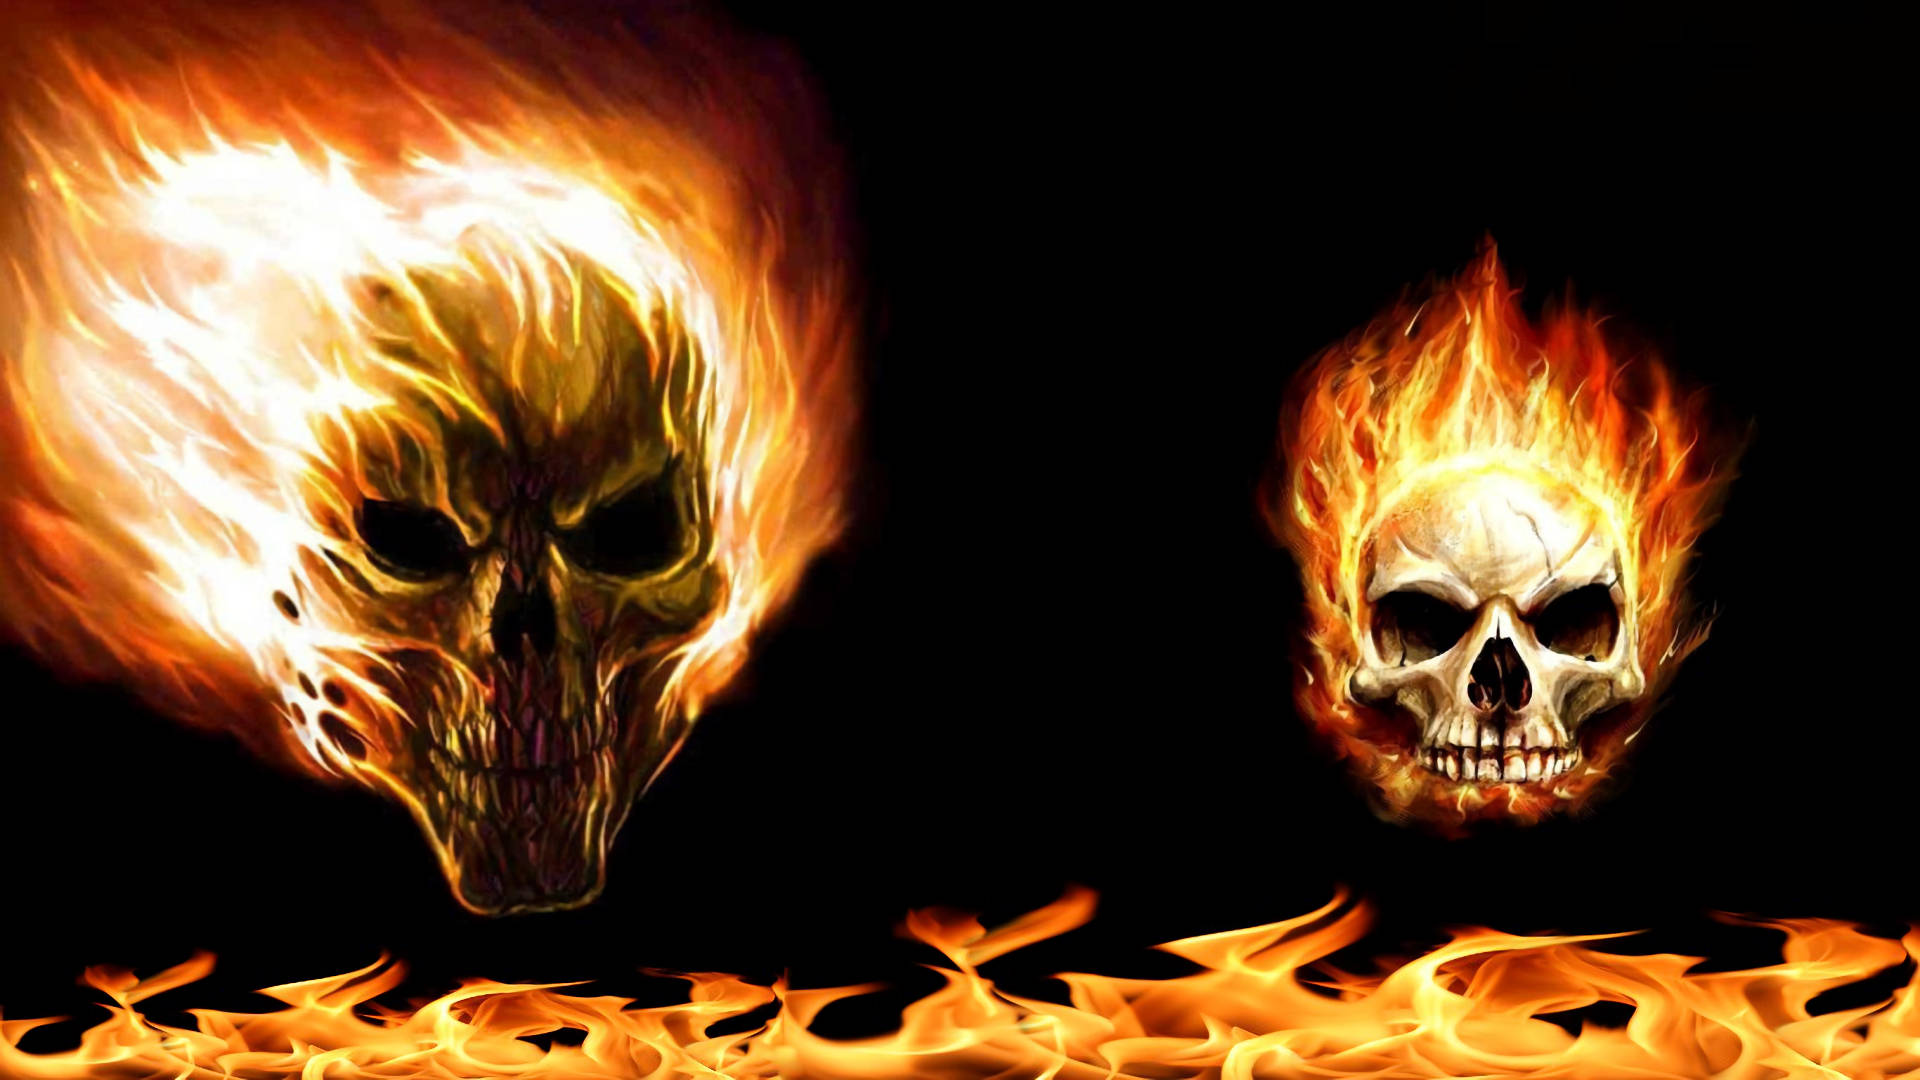 Scary Skulls On Fire Background